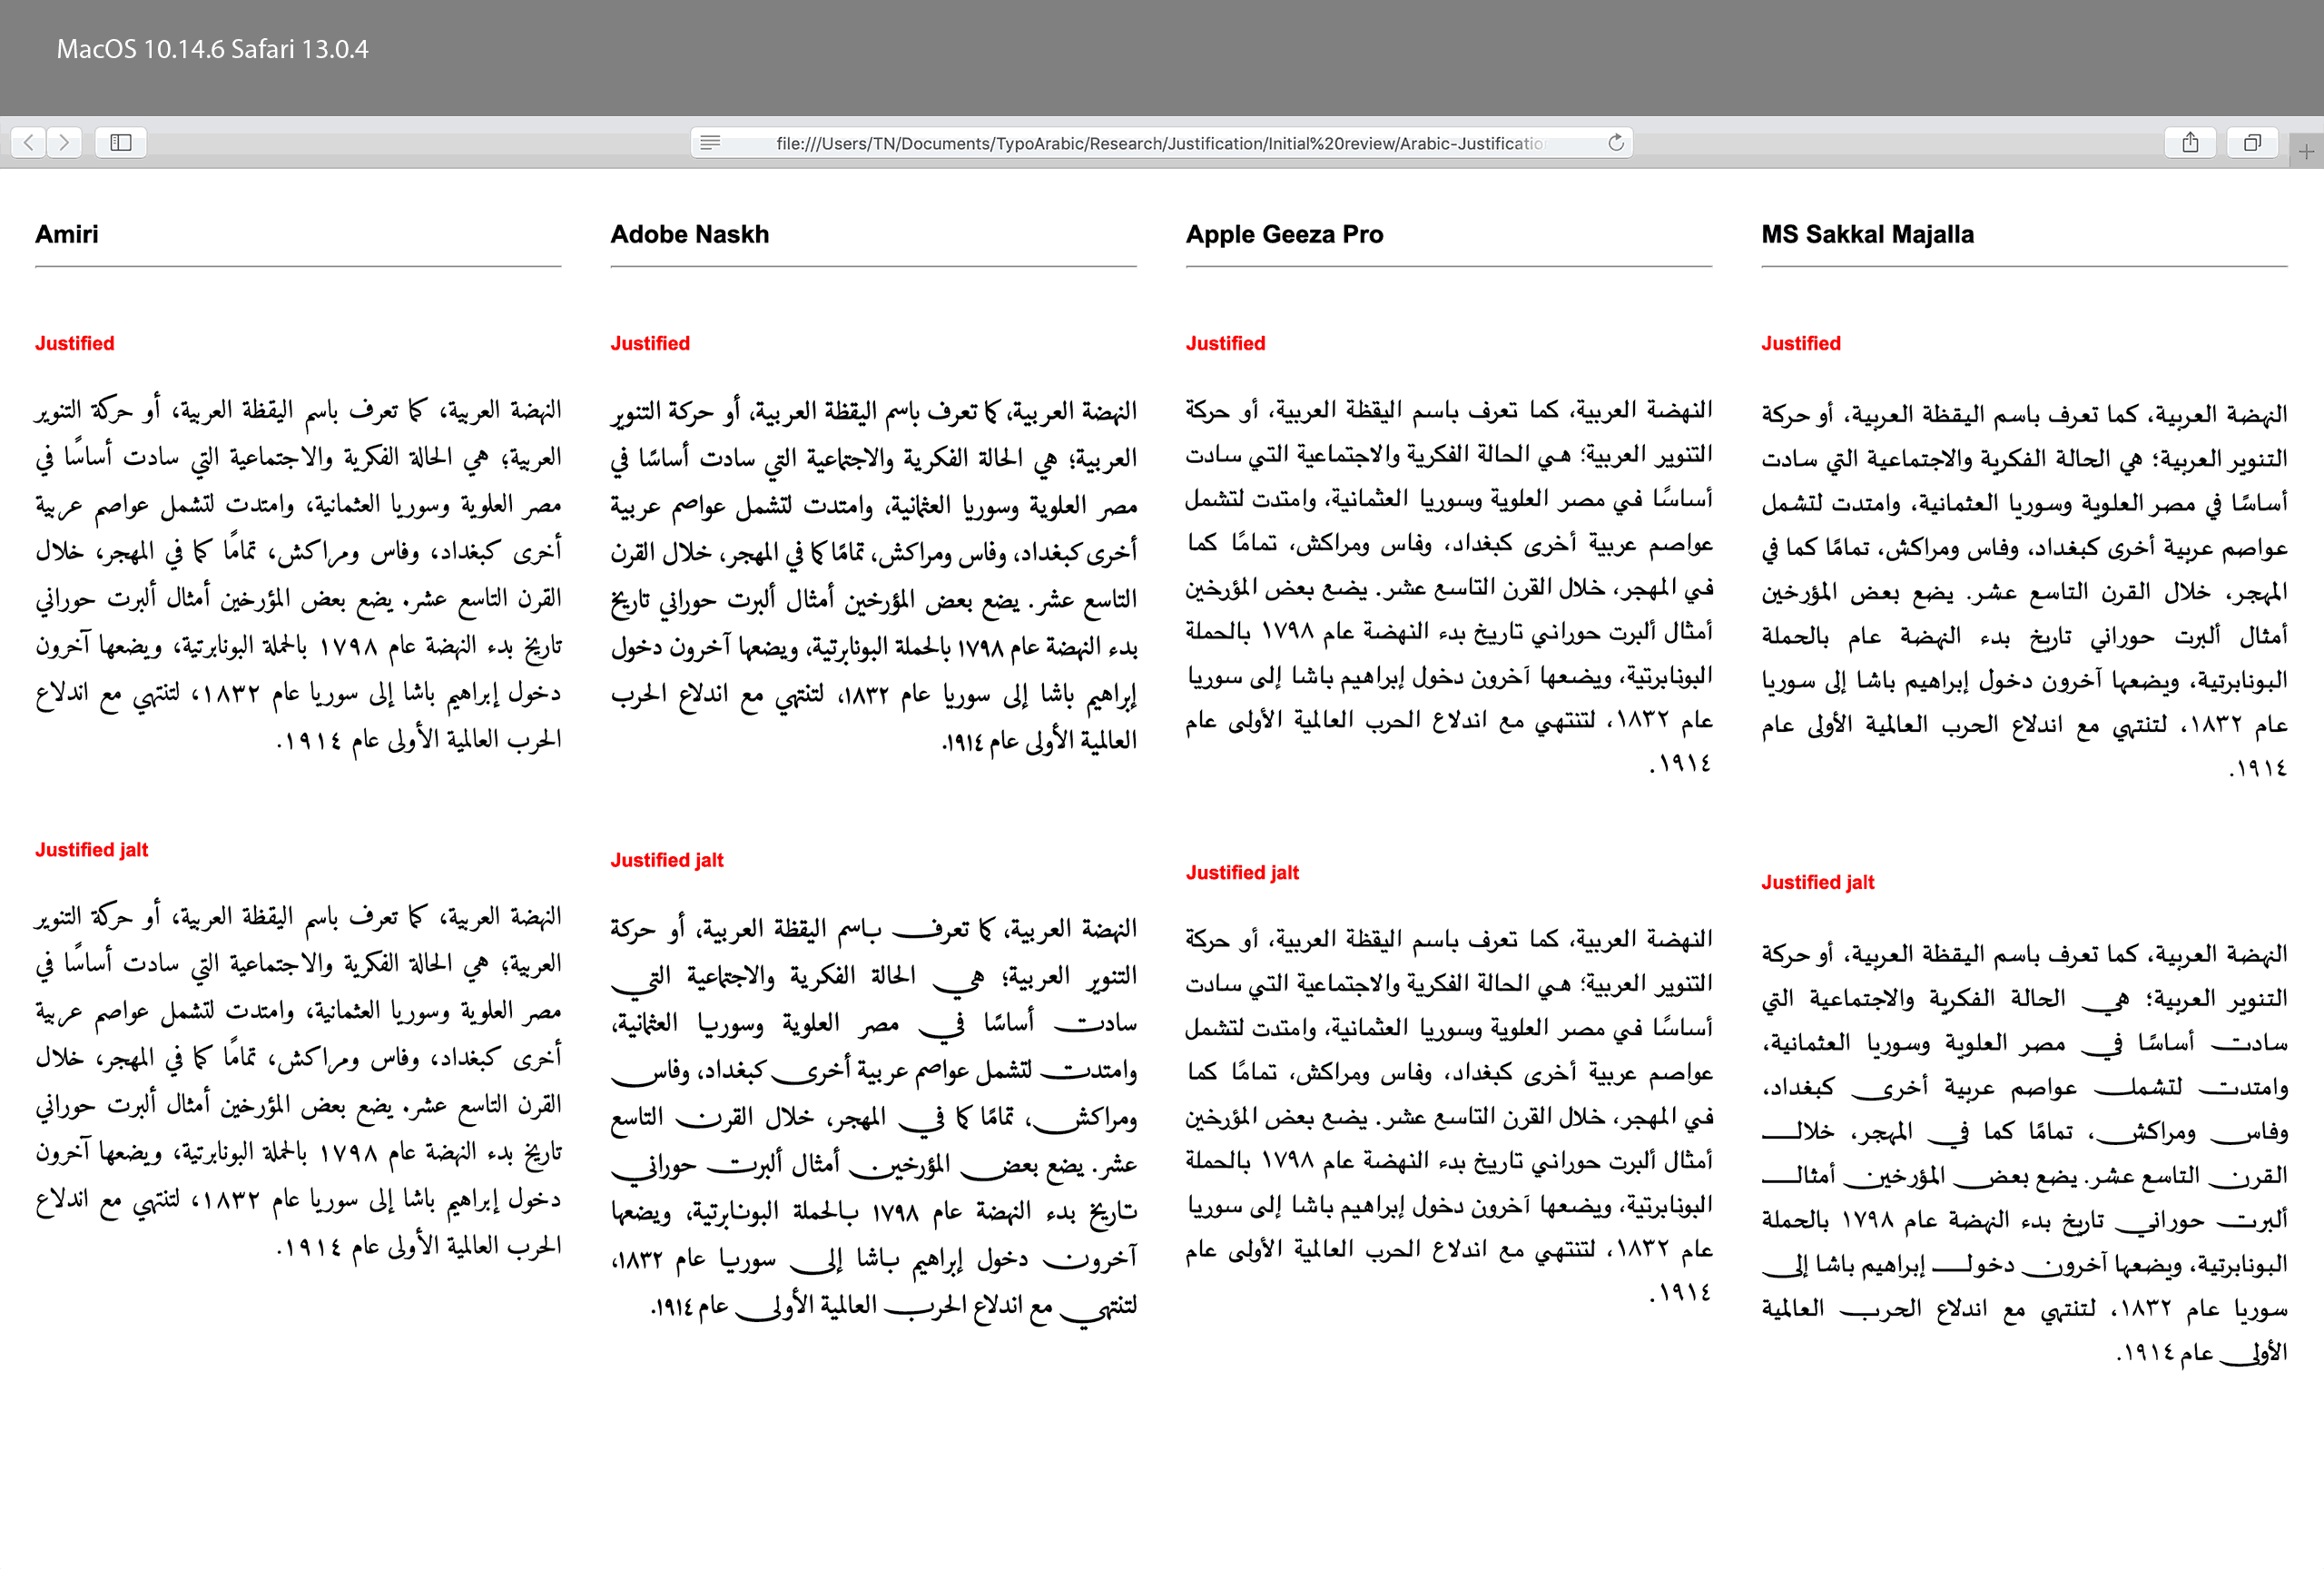 Overview of Arabic text justification in current browsers using OT fonts.